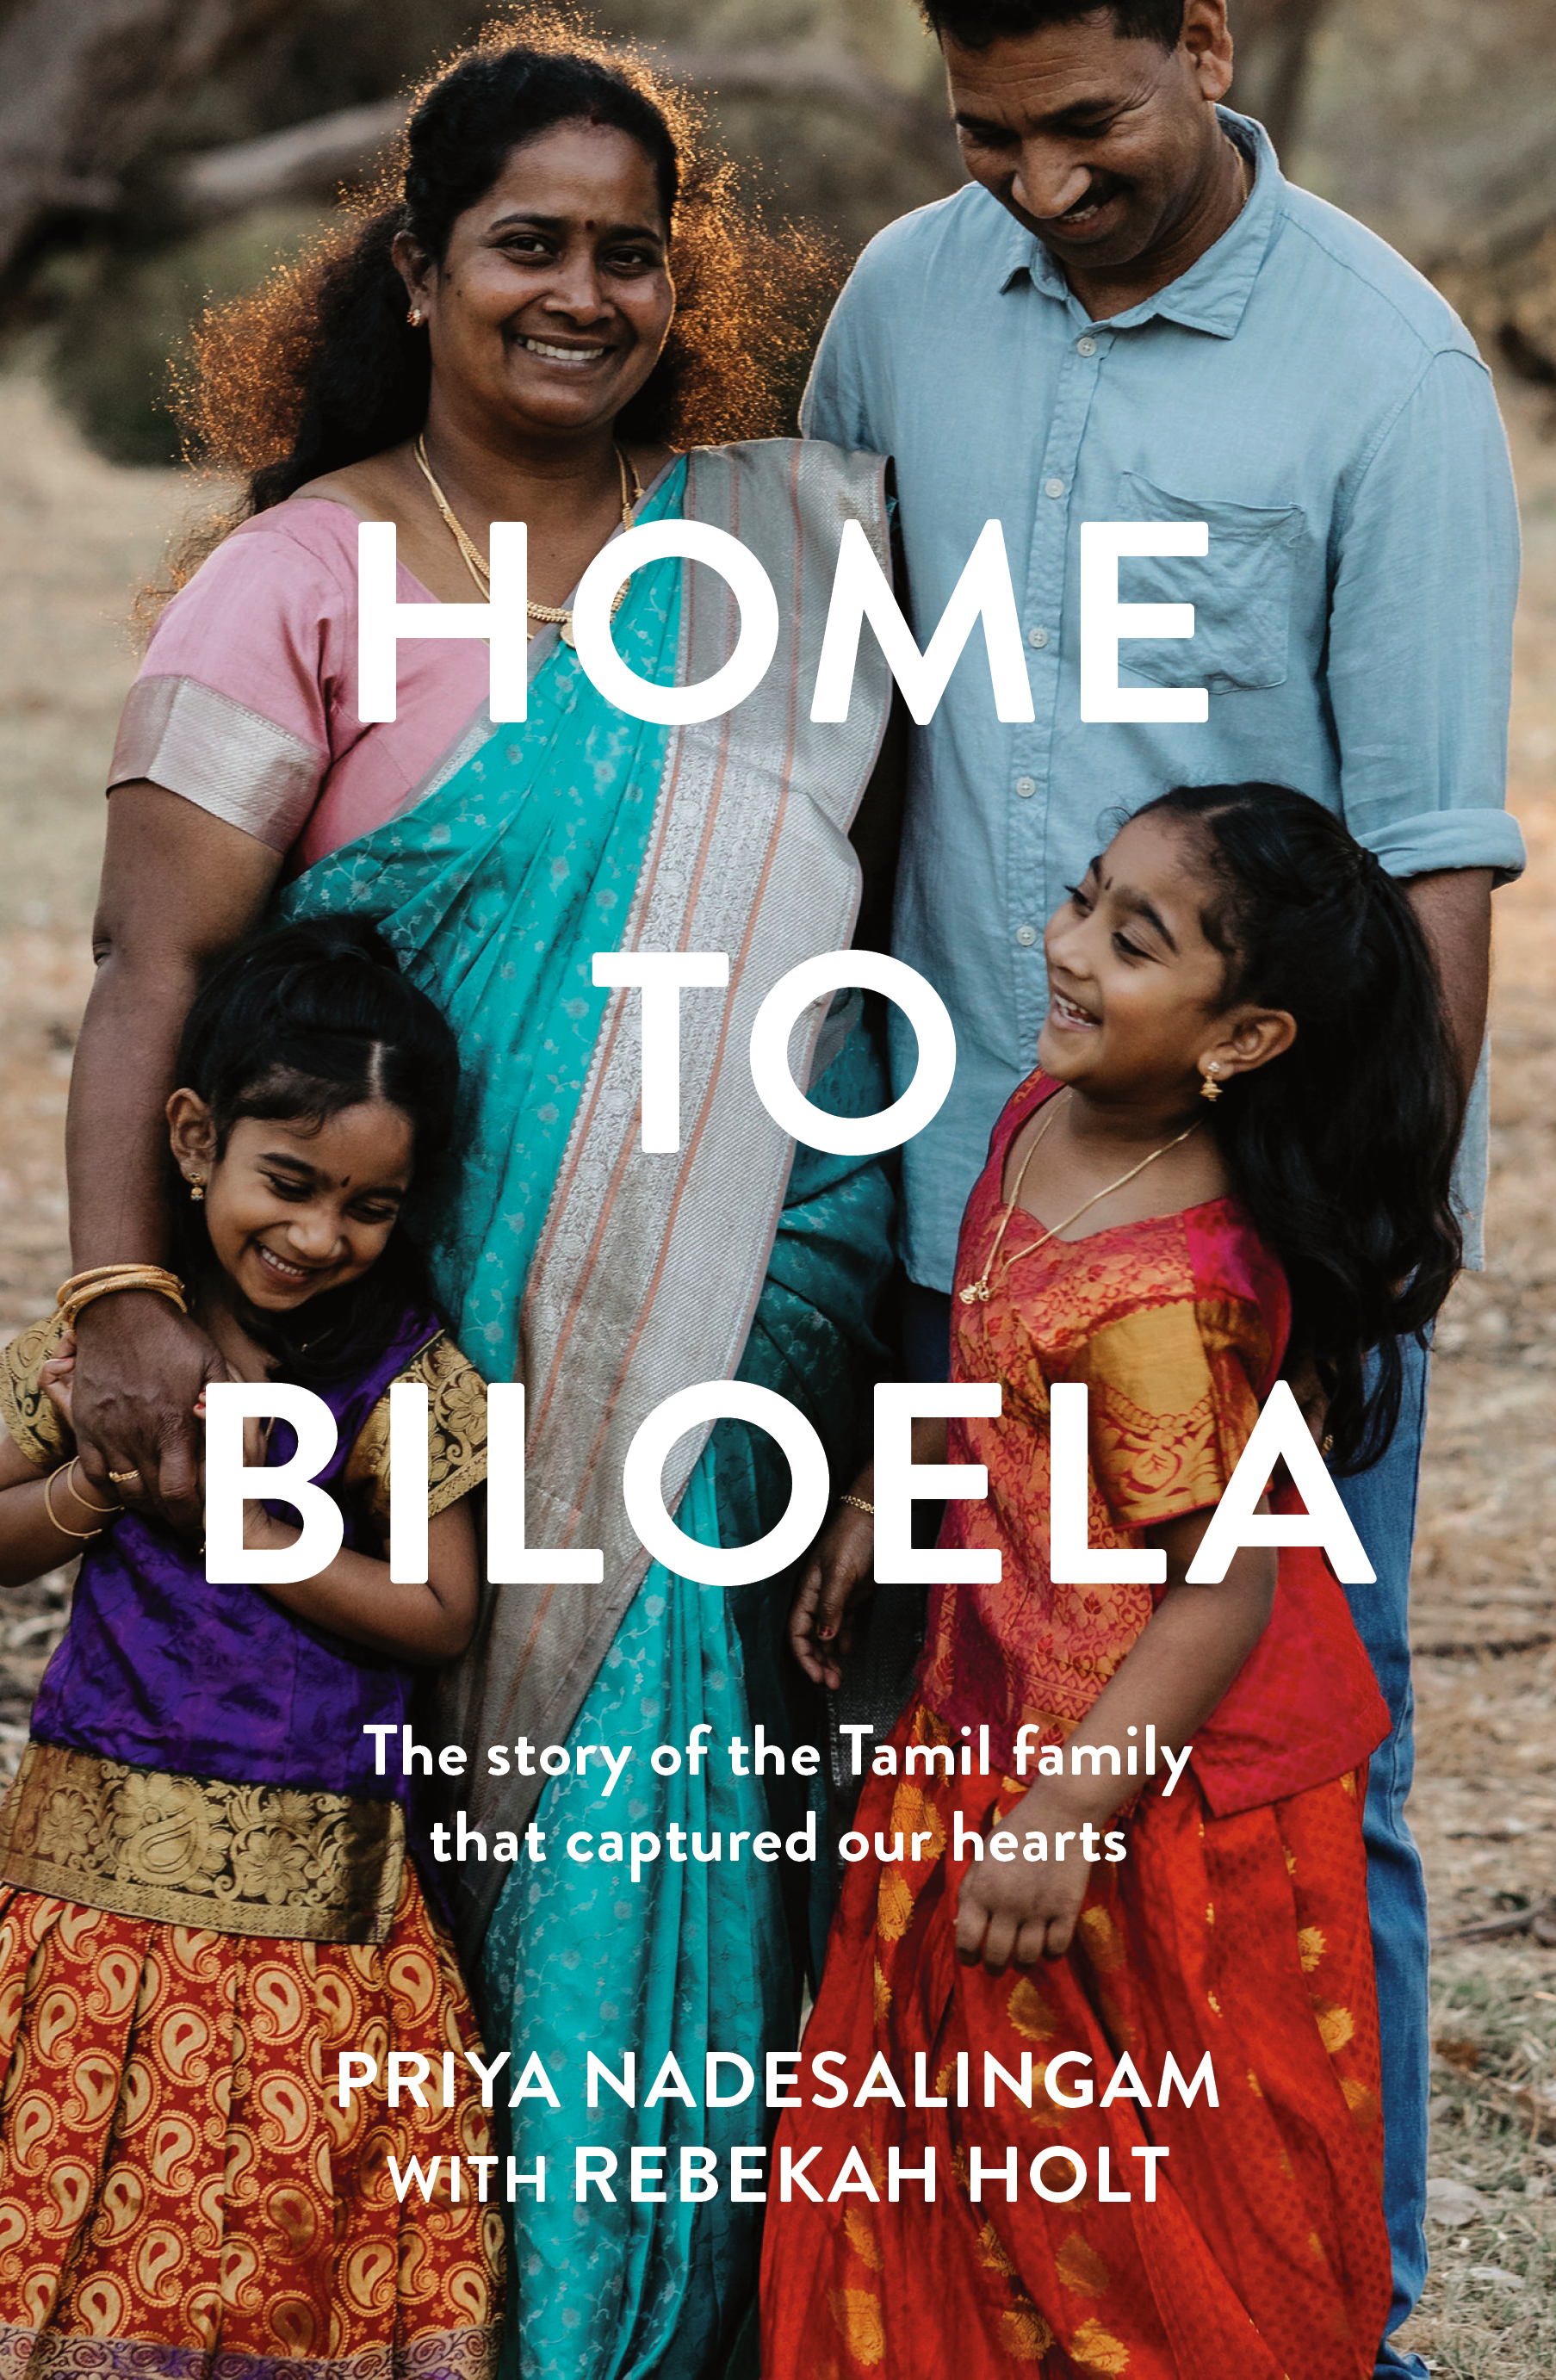 Book cover image featuring a photo of the Nadesalingam family and title Home to Biloela by Priya Nadesalingam with Rebekah Holt.